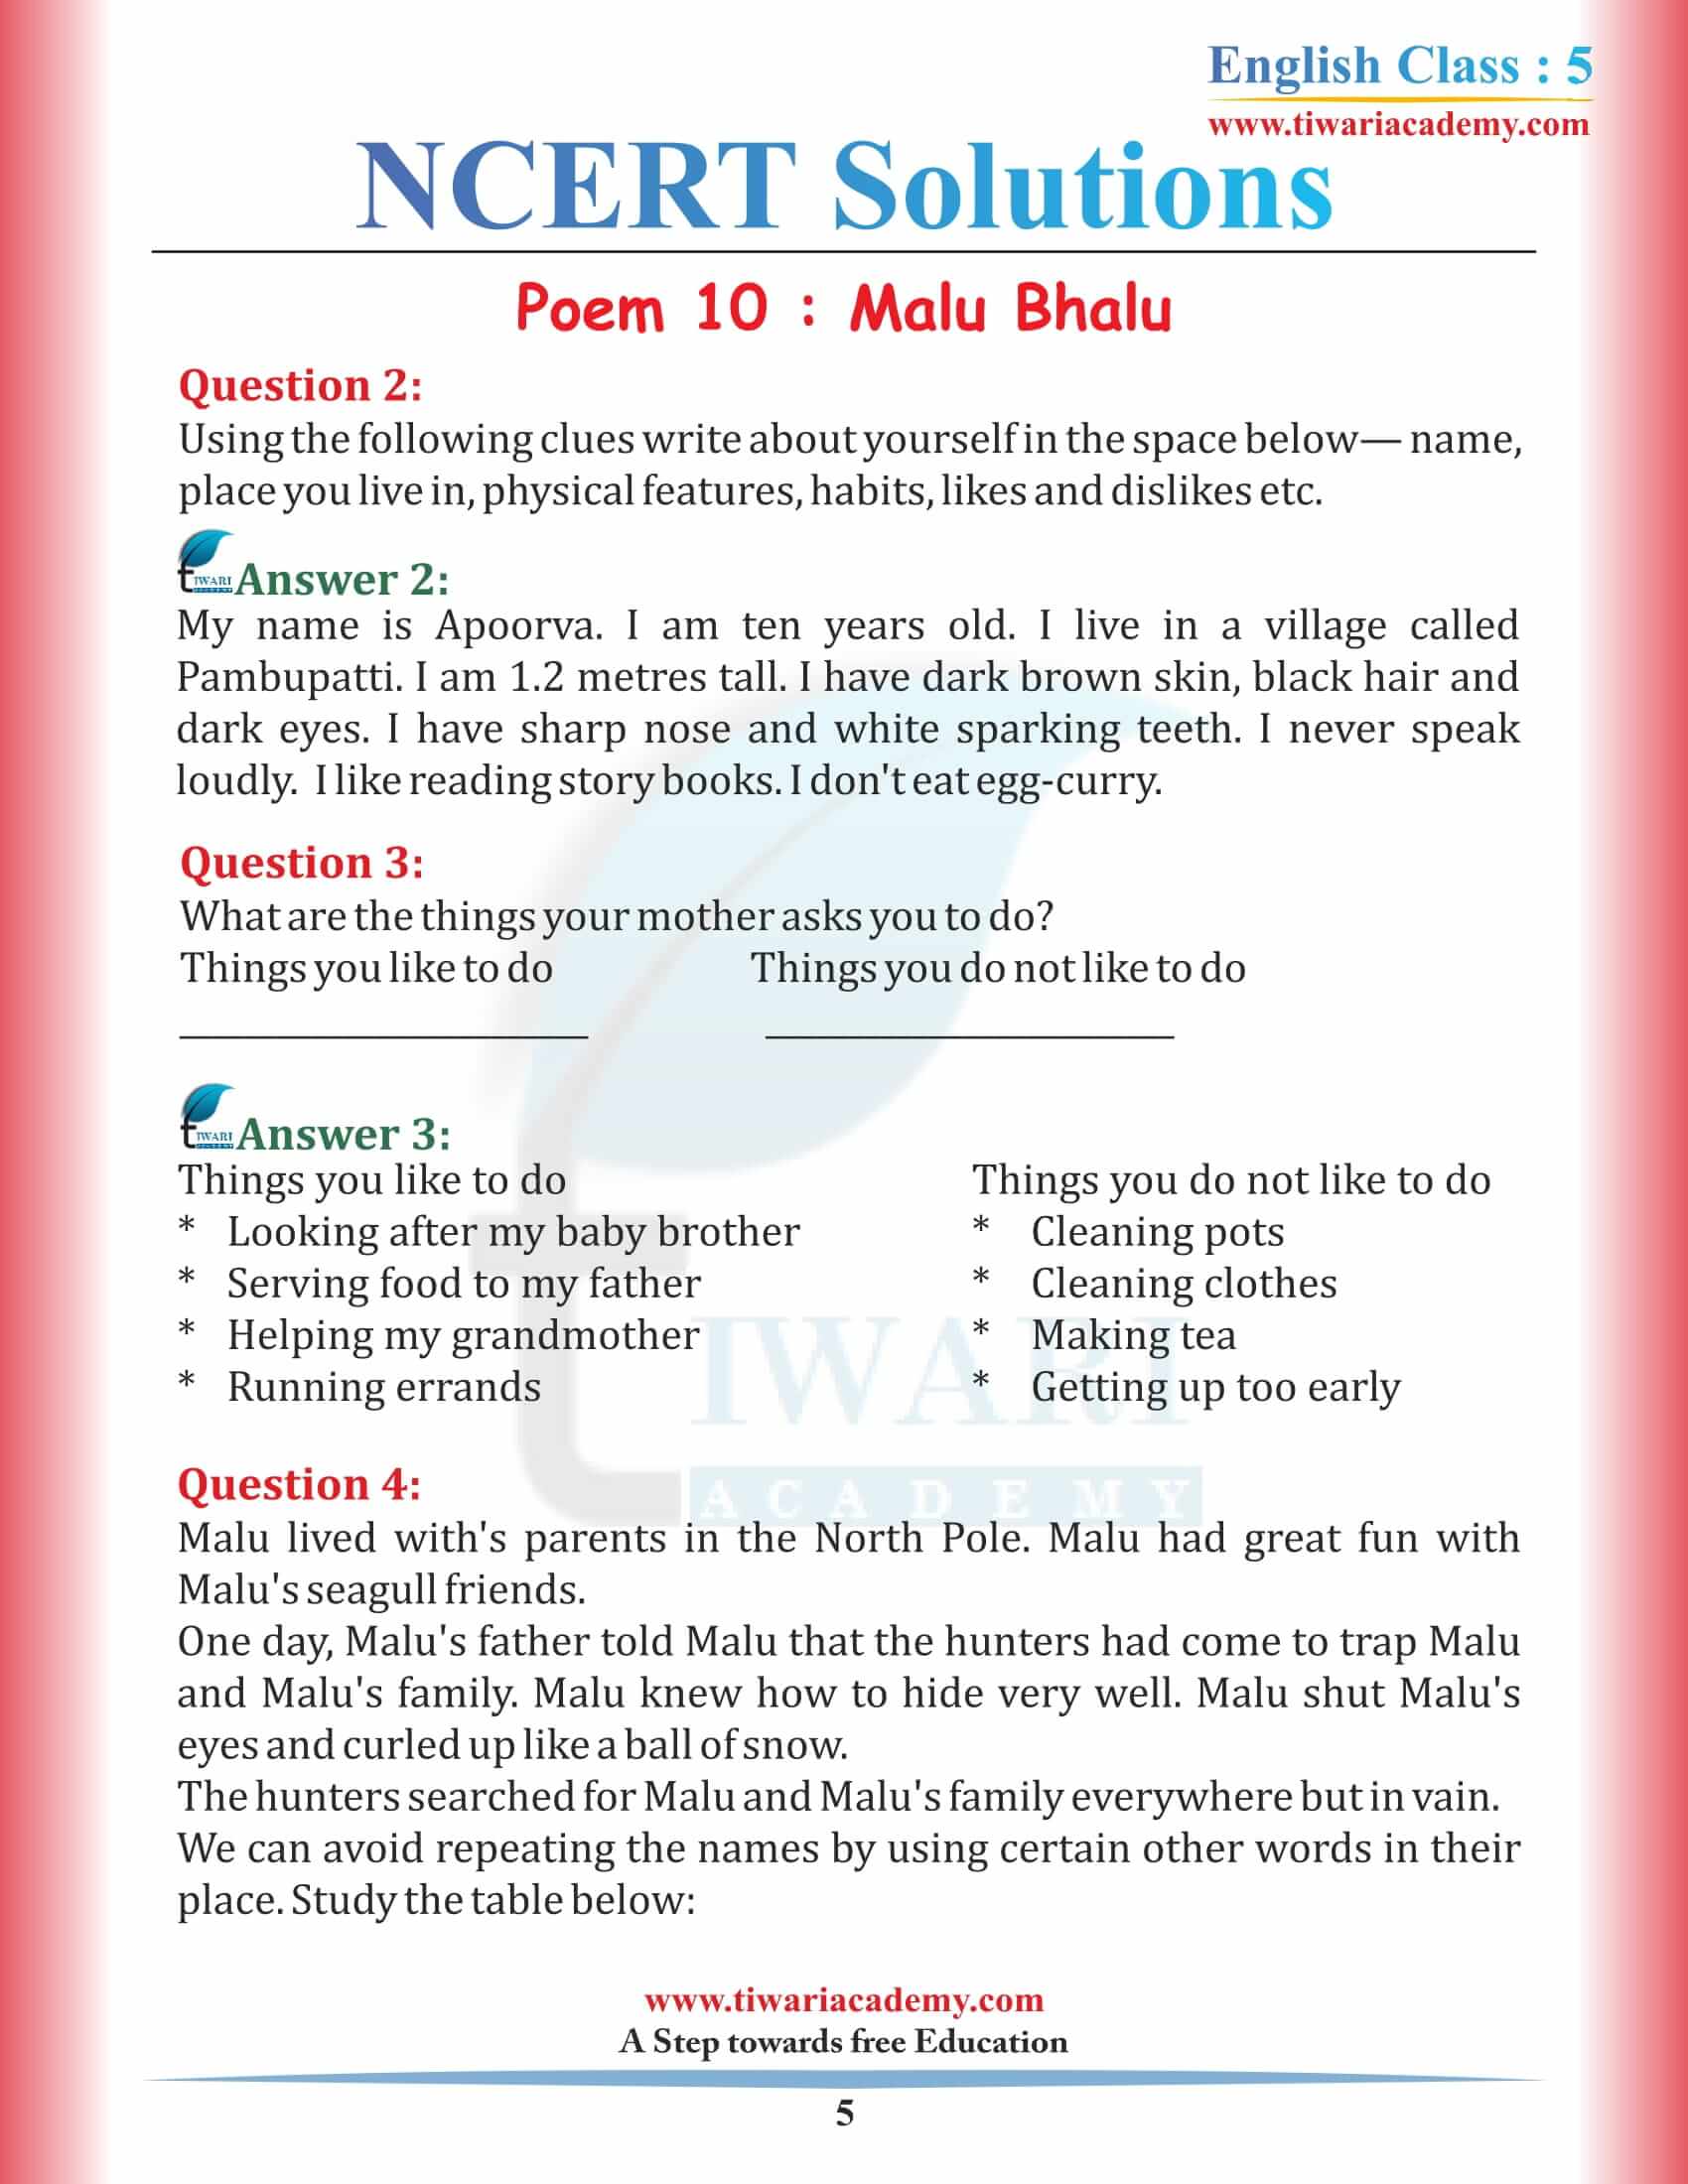 NCERT Solutions for Class 5 English Chapter 10 Malu Bhalu sols free